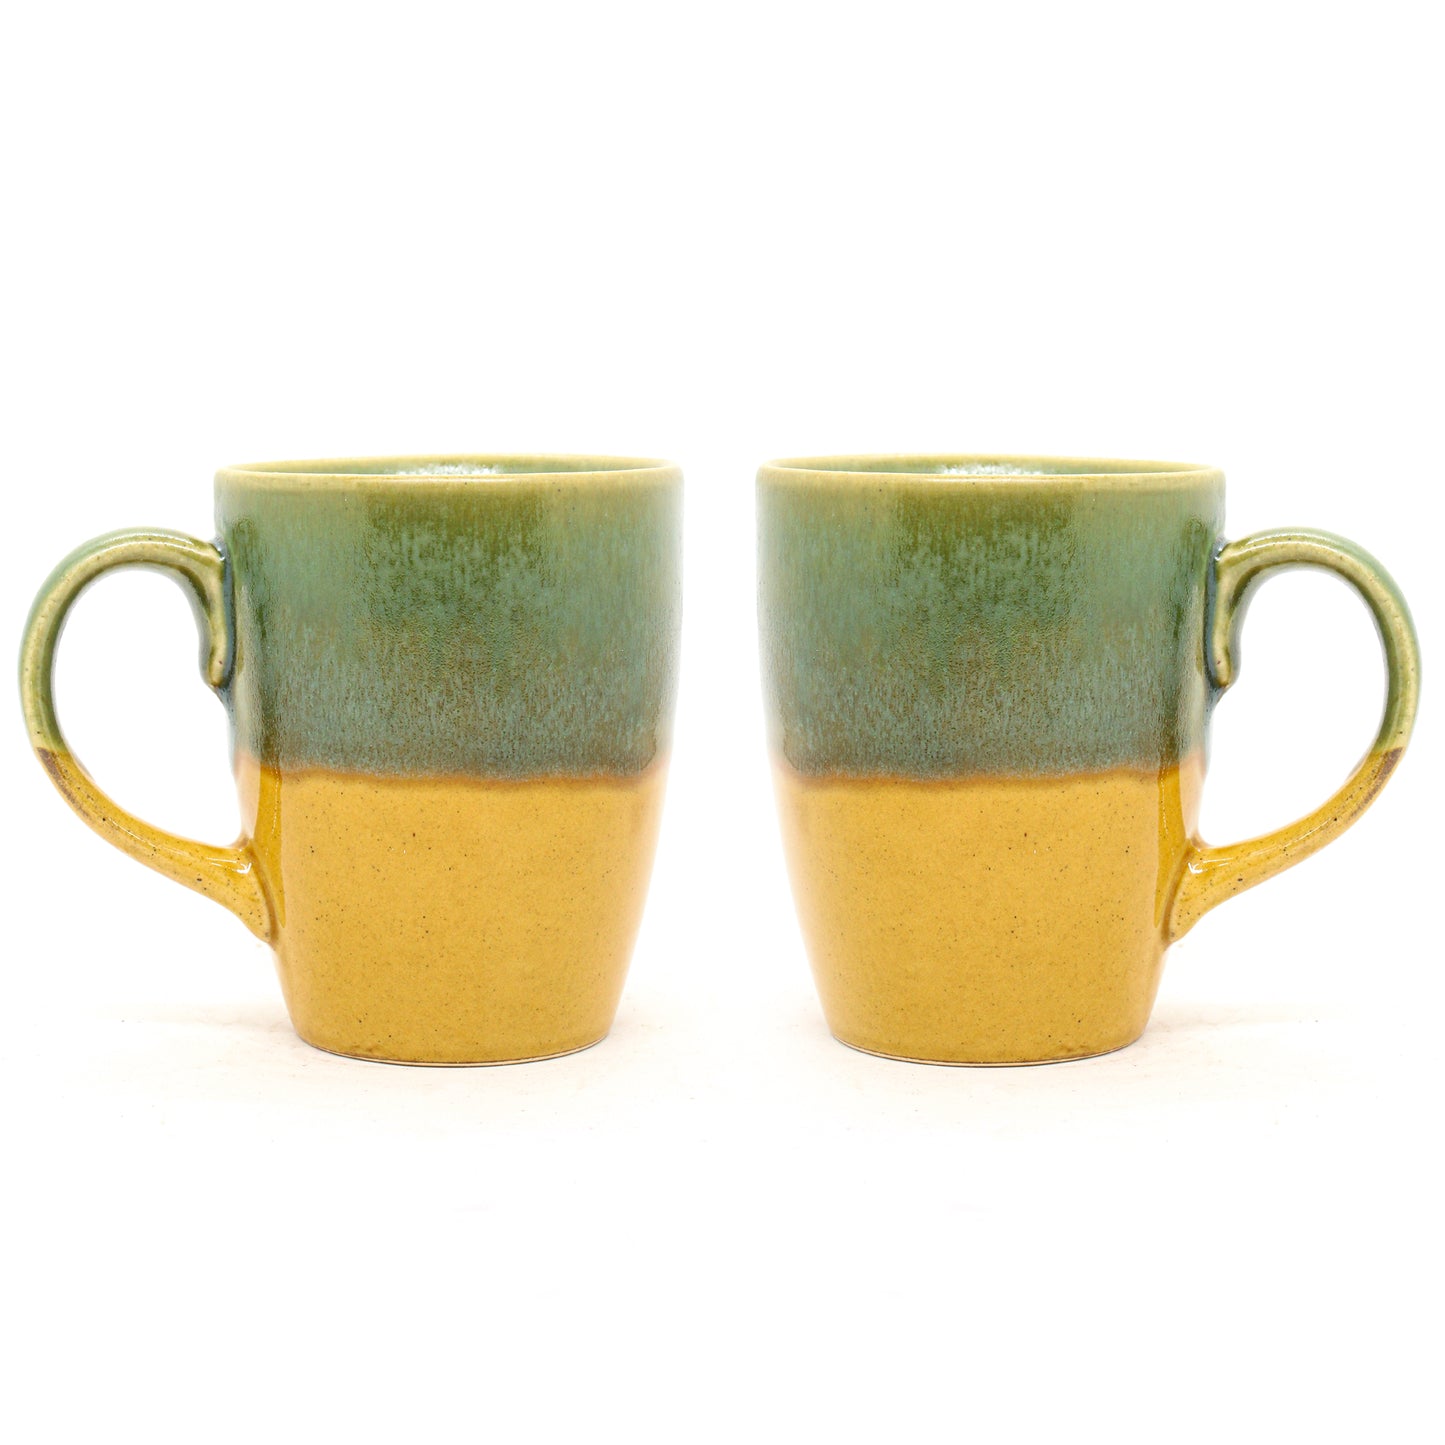 'Smooth, Just Like Your Last Pick Up Line!' Ceramic Coffee Mug (Set of Two)